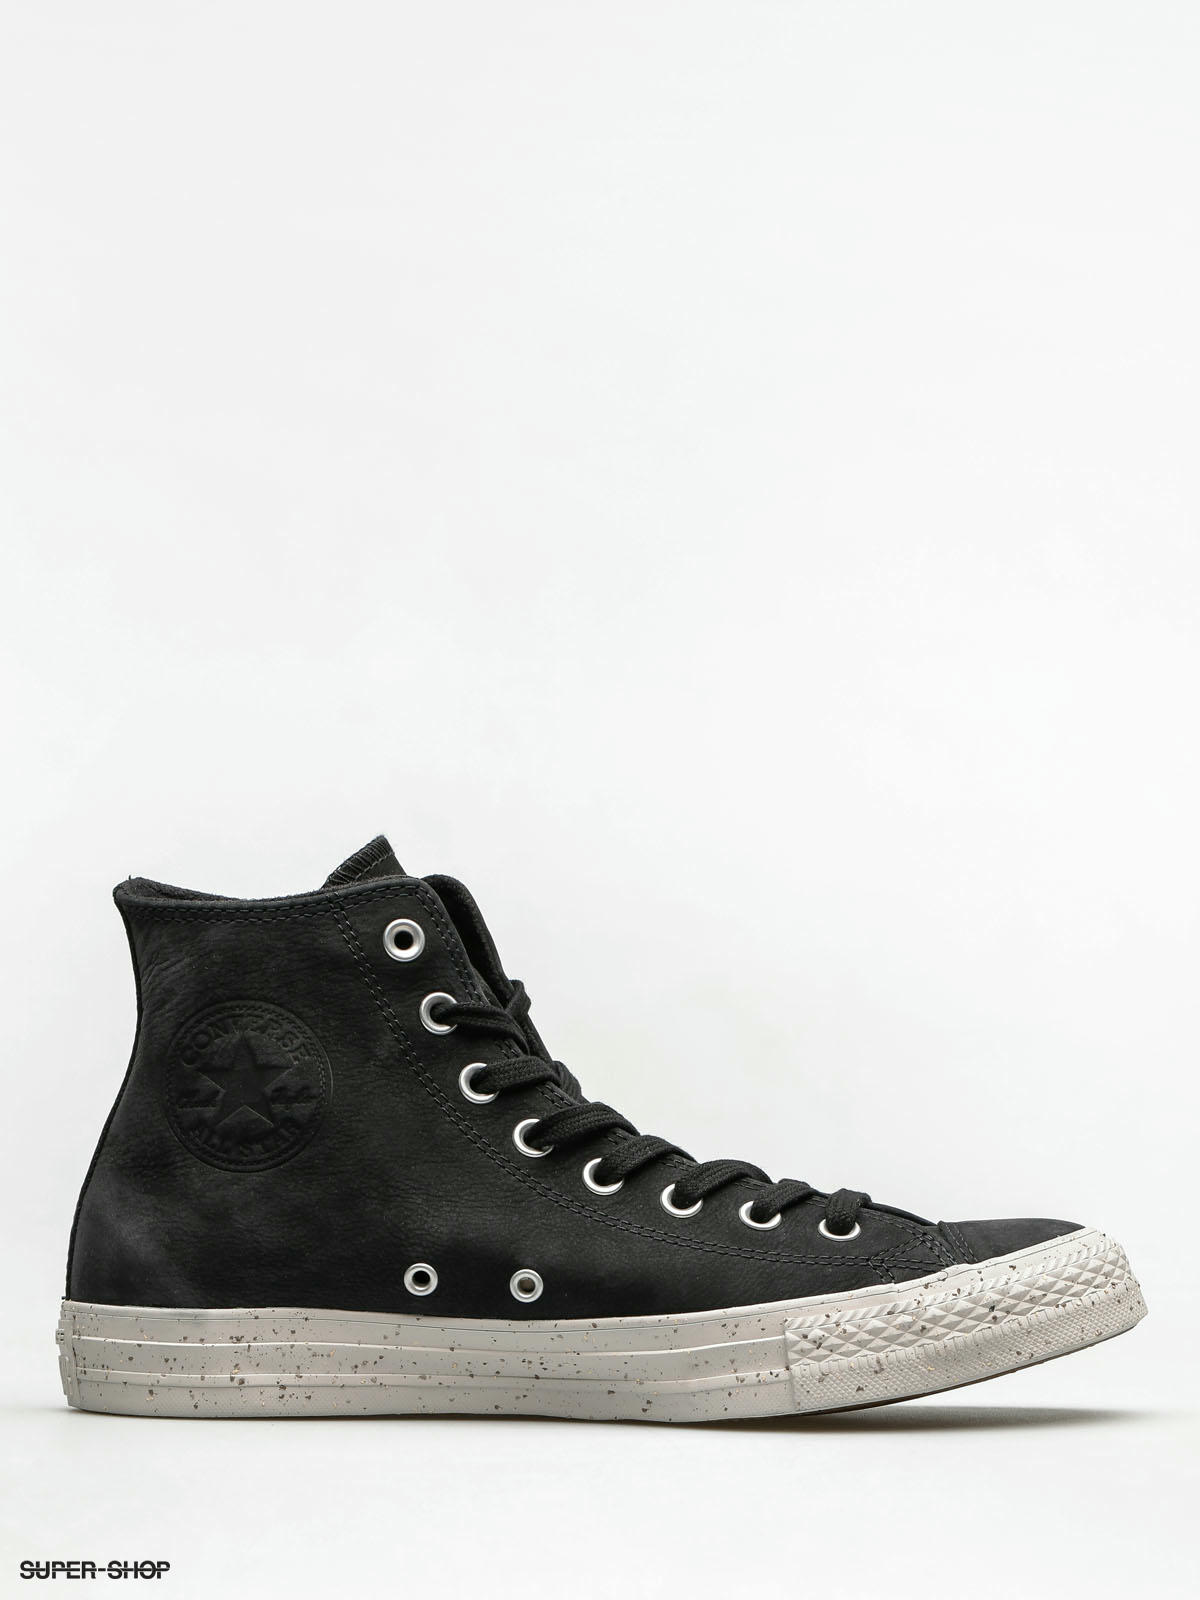 converse chuck taylor all star pale putty